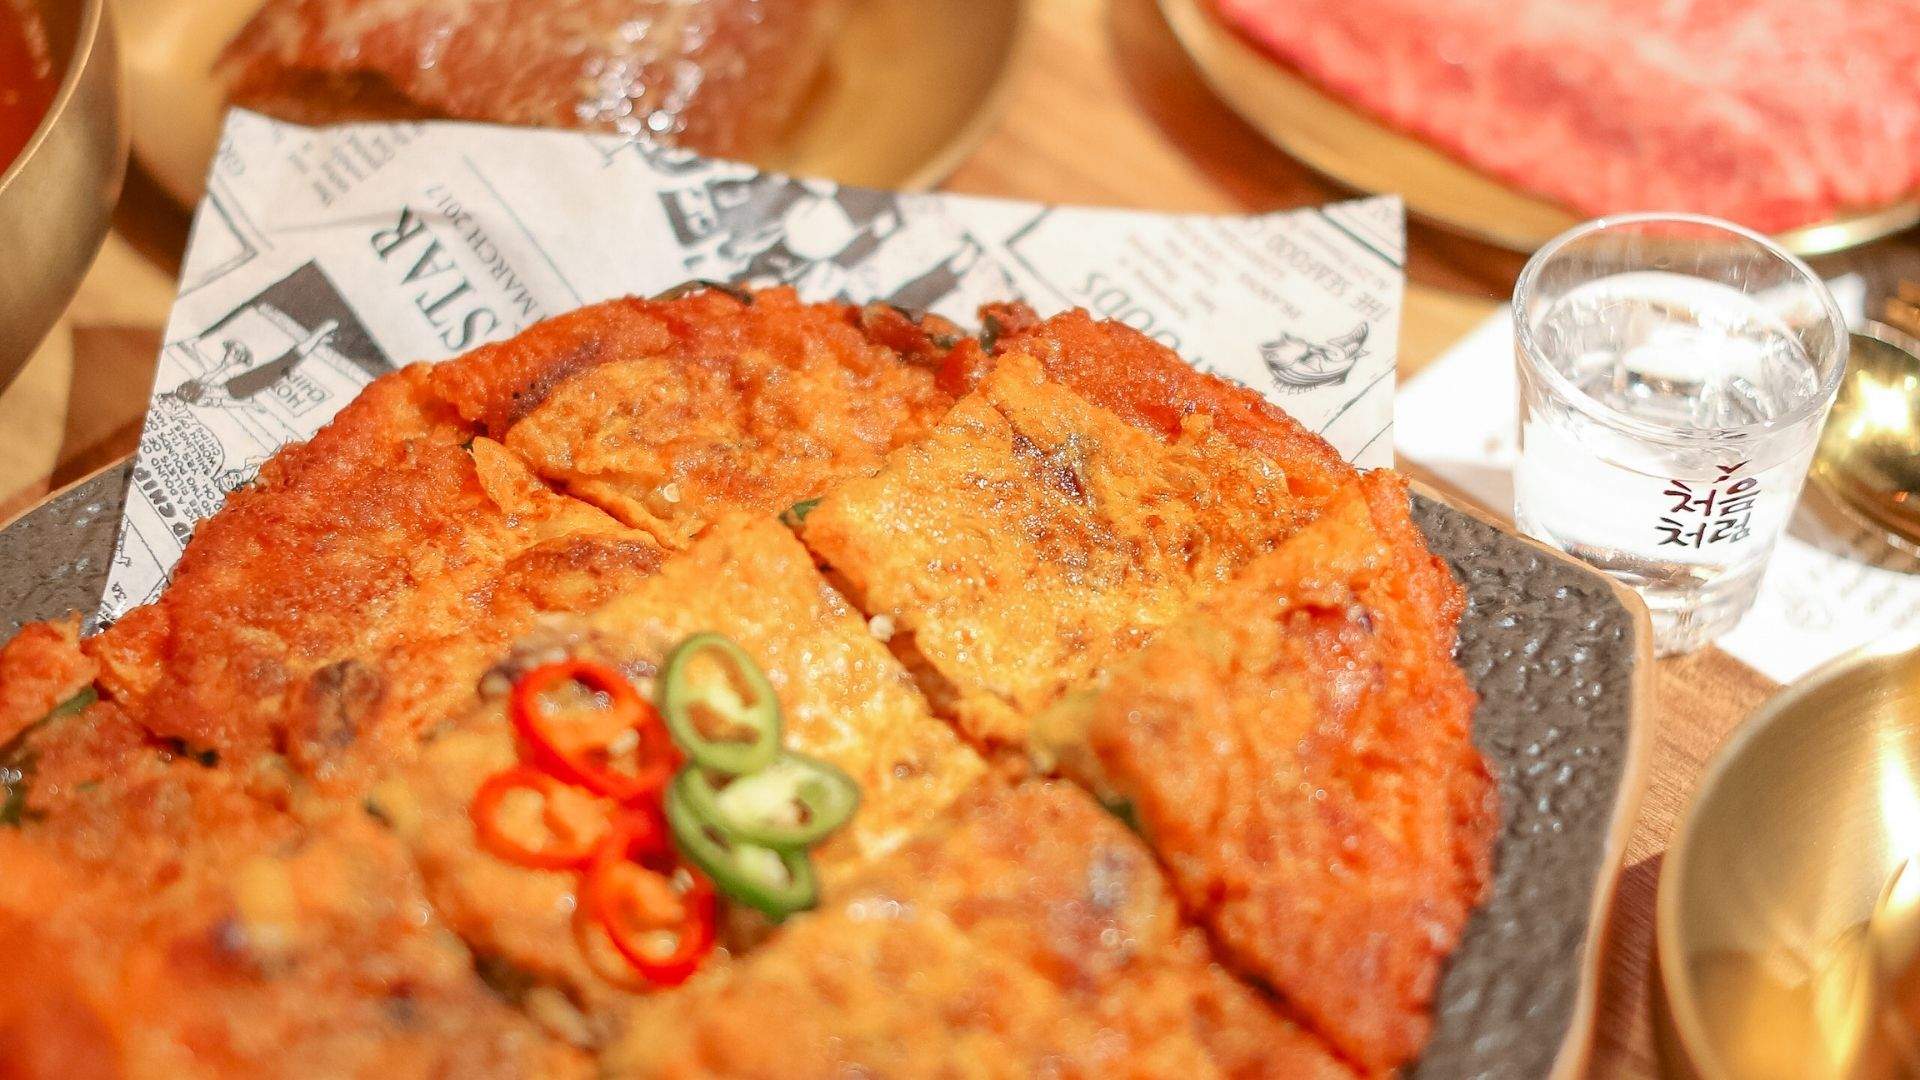 A seafood pancake from the menu of Darling Square's 789 Korean BBQ.